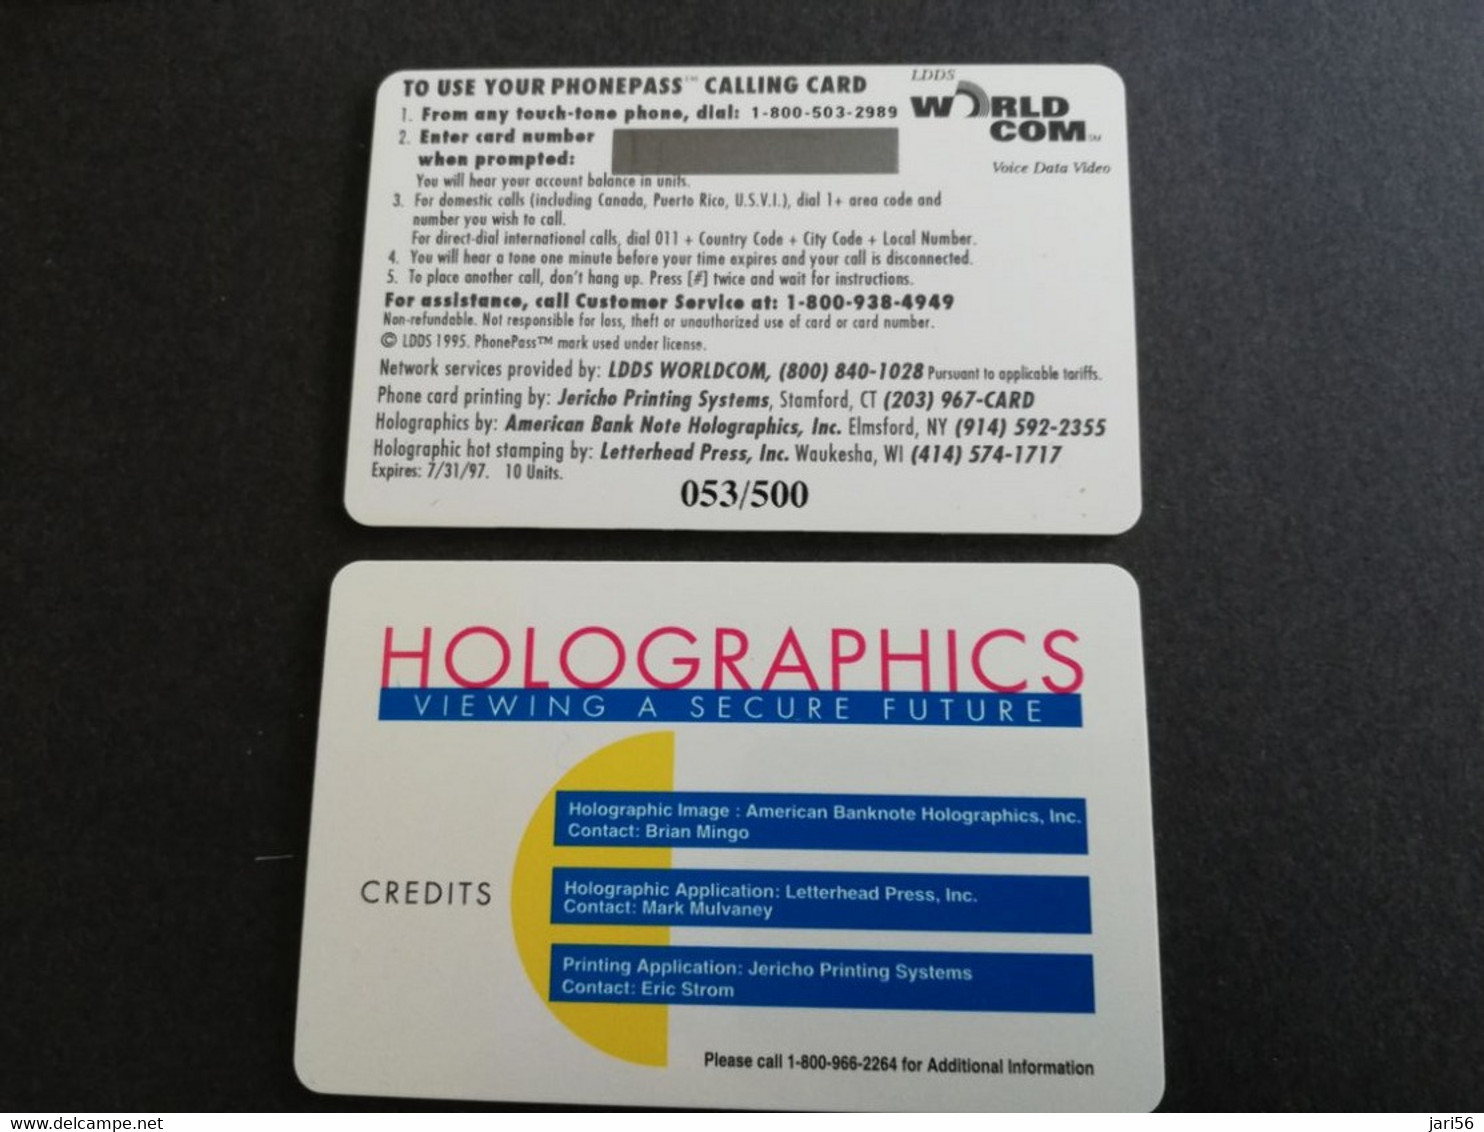 UNITED STATES  US TELECARD/ GALA DINER FOR LARRY BRILLIANT - GOLD  CARD/ HOLOGRA   LIMITED EDITION   MINT CARD ** 6117** - Collections